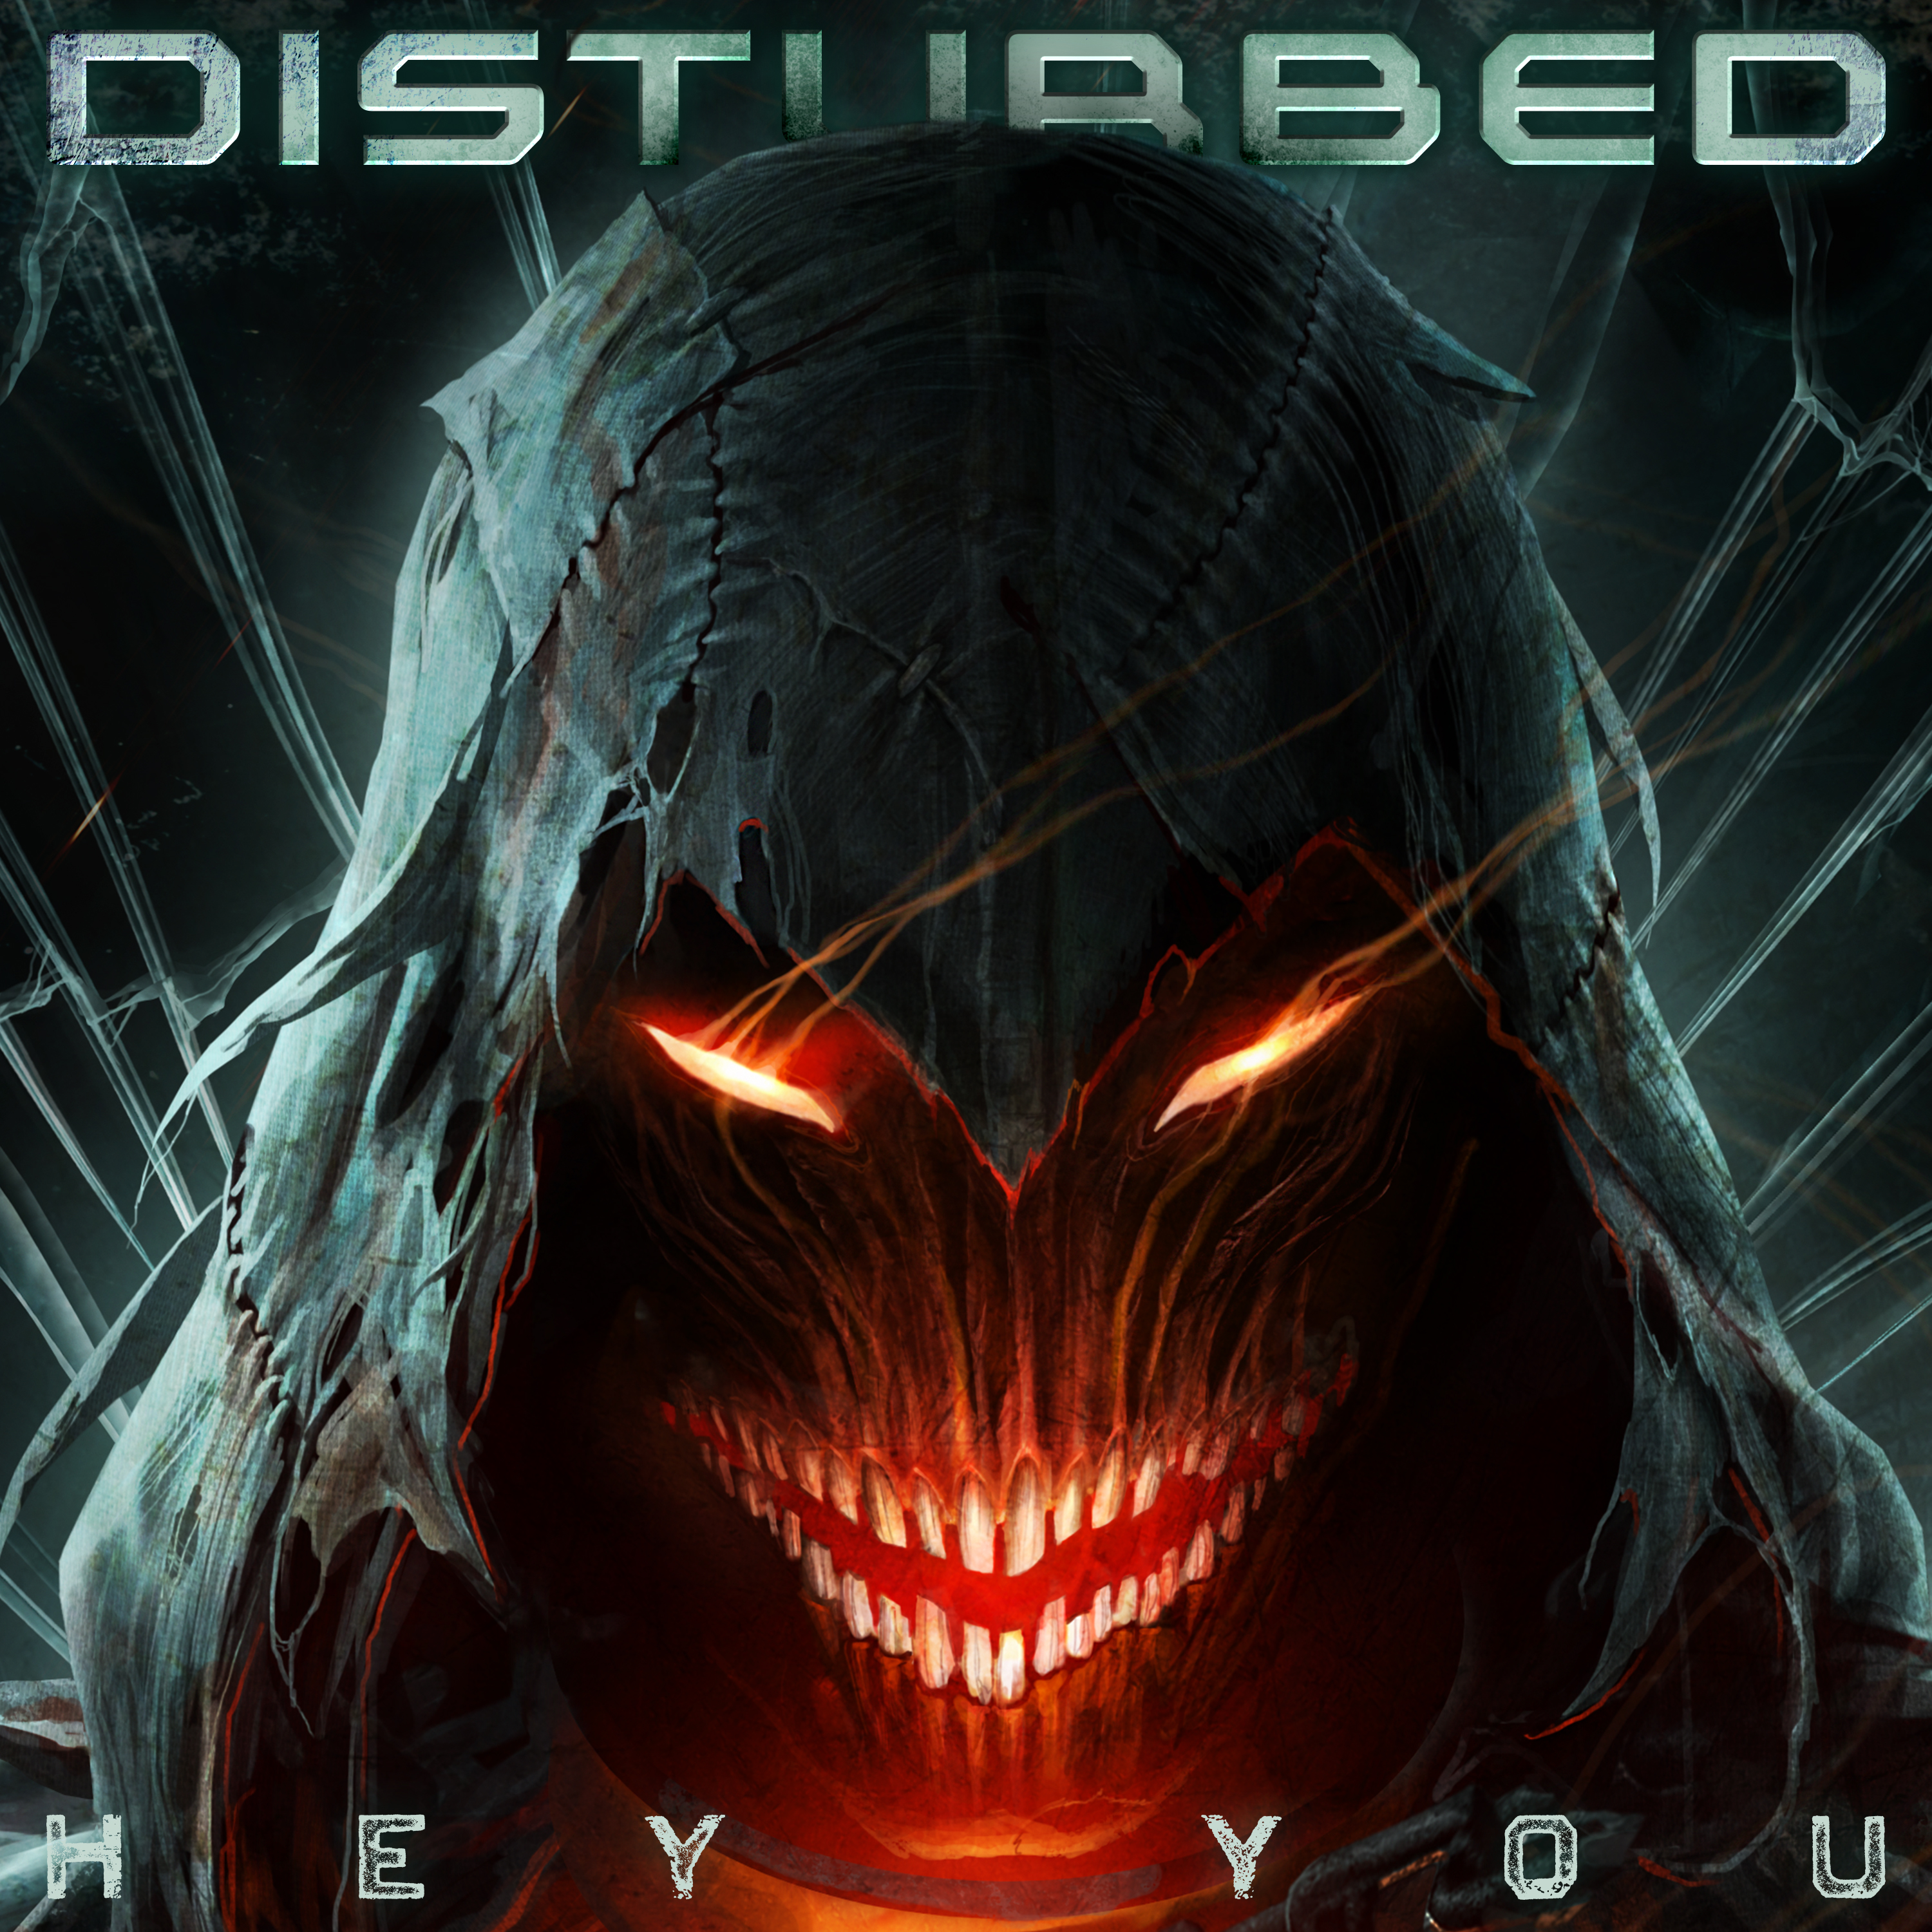 Disturbed's single artwork for "Hey You" featuring The Guy